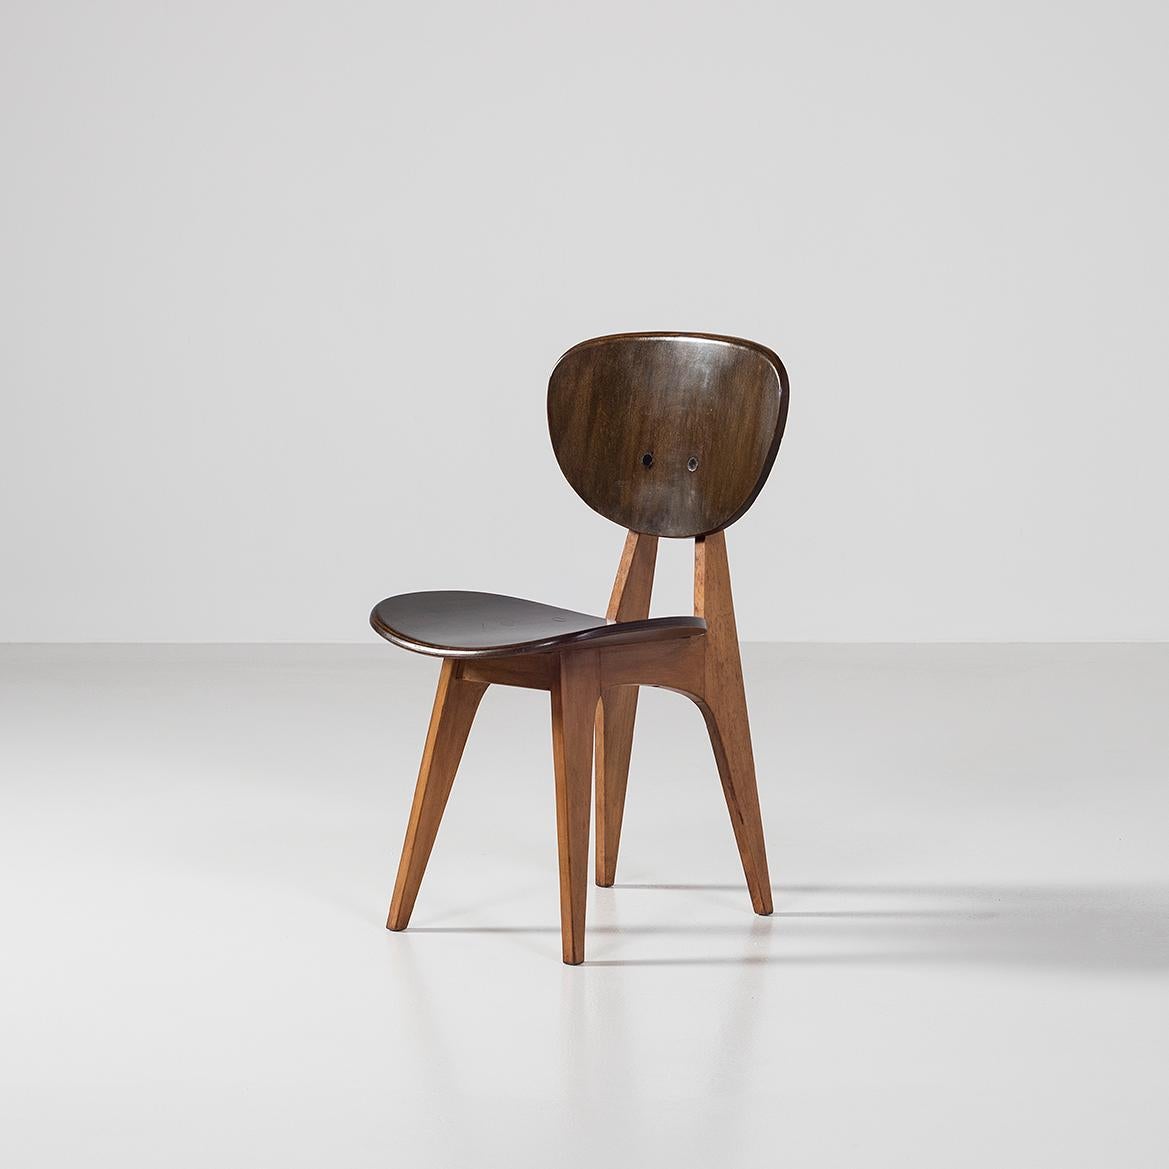 The dining chair N°3221 was designed by Junzo Sakakura Studio in 1953.

Junzo Sakakura, who studied under Le Corbusier, wanted to design a chair that would suit Japanese interiors and lifestyle. One can easily see the inspiration with Jean Prouvé